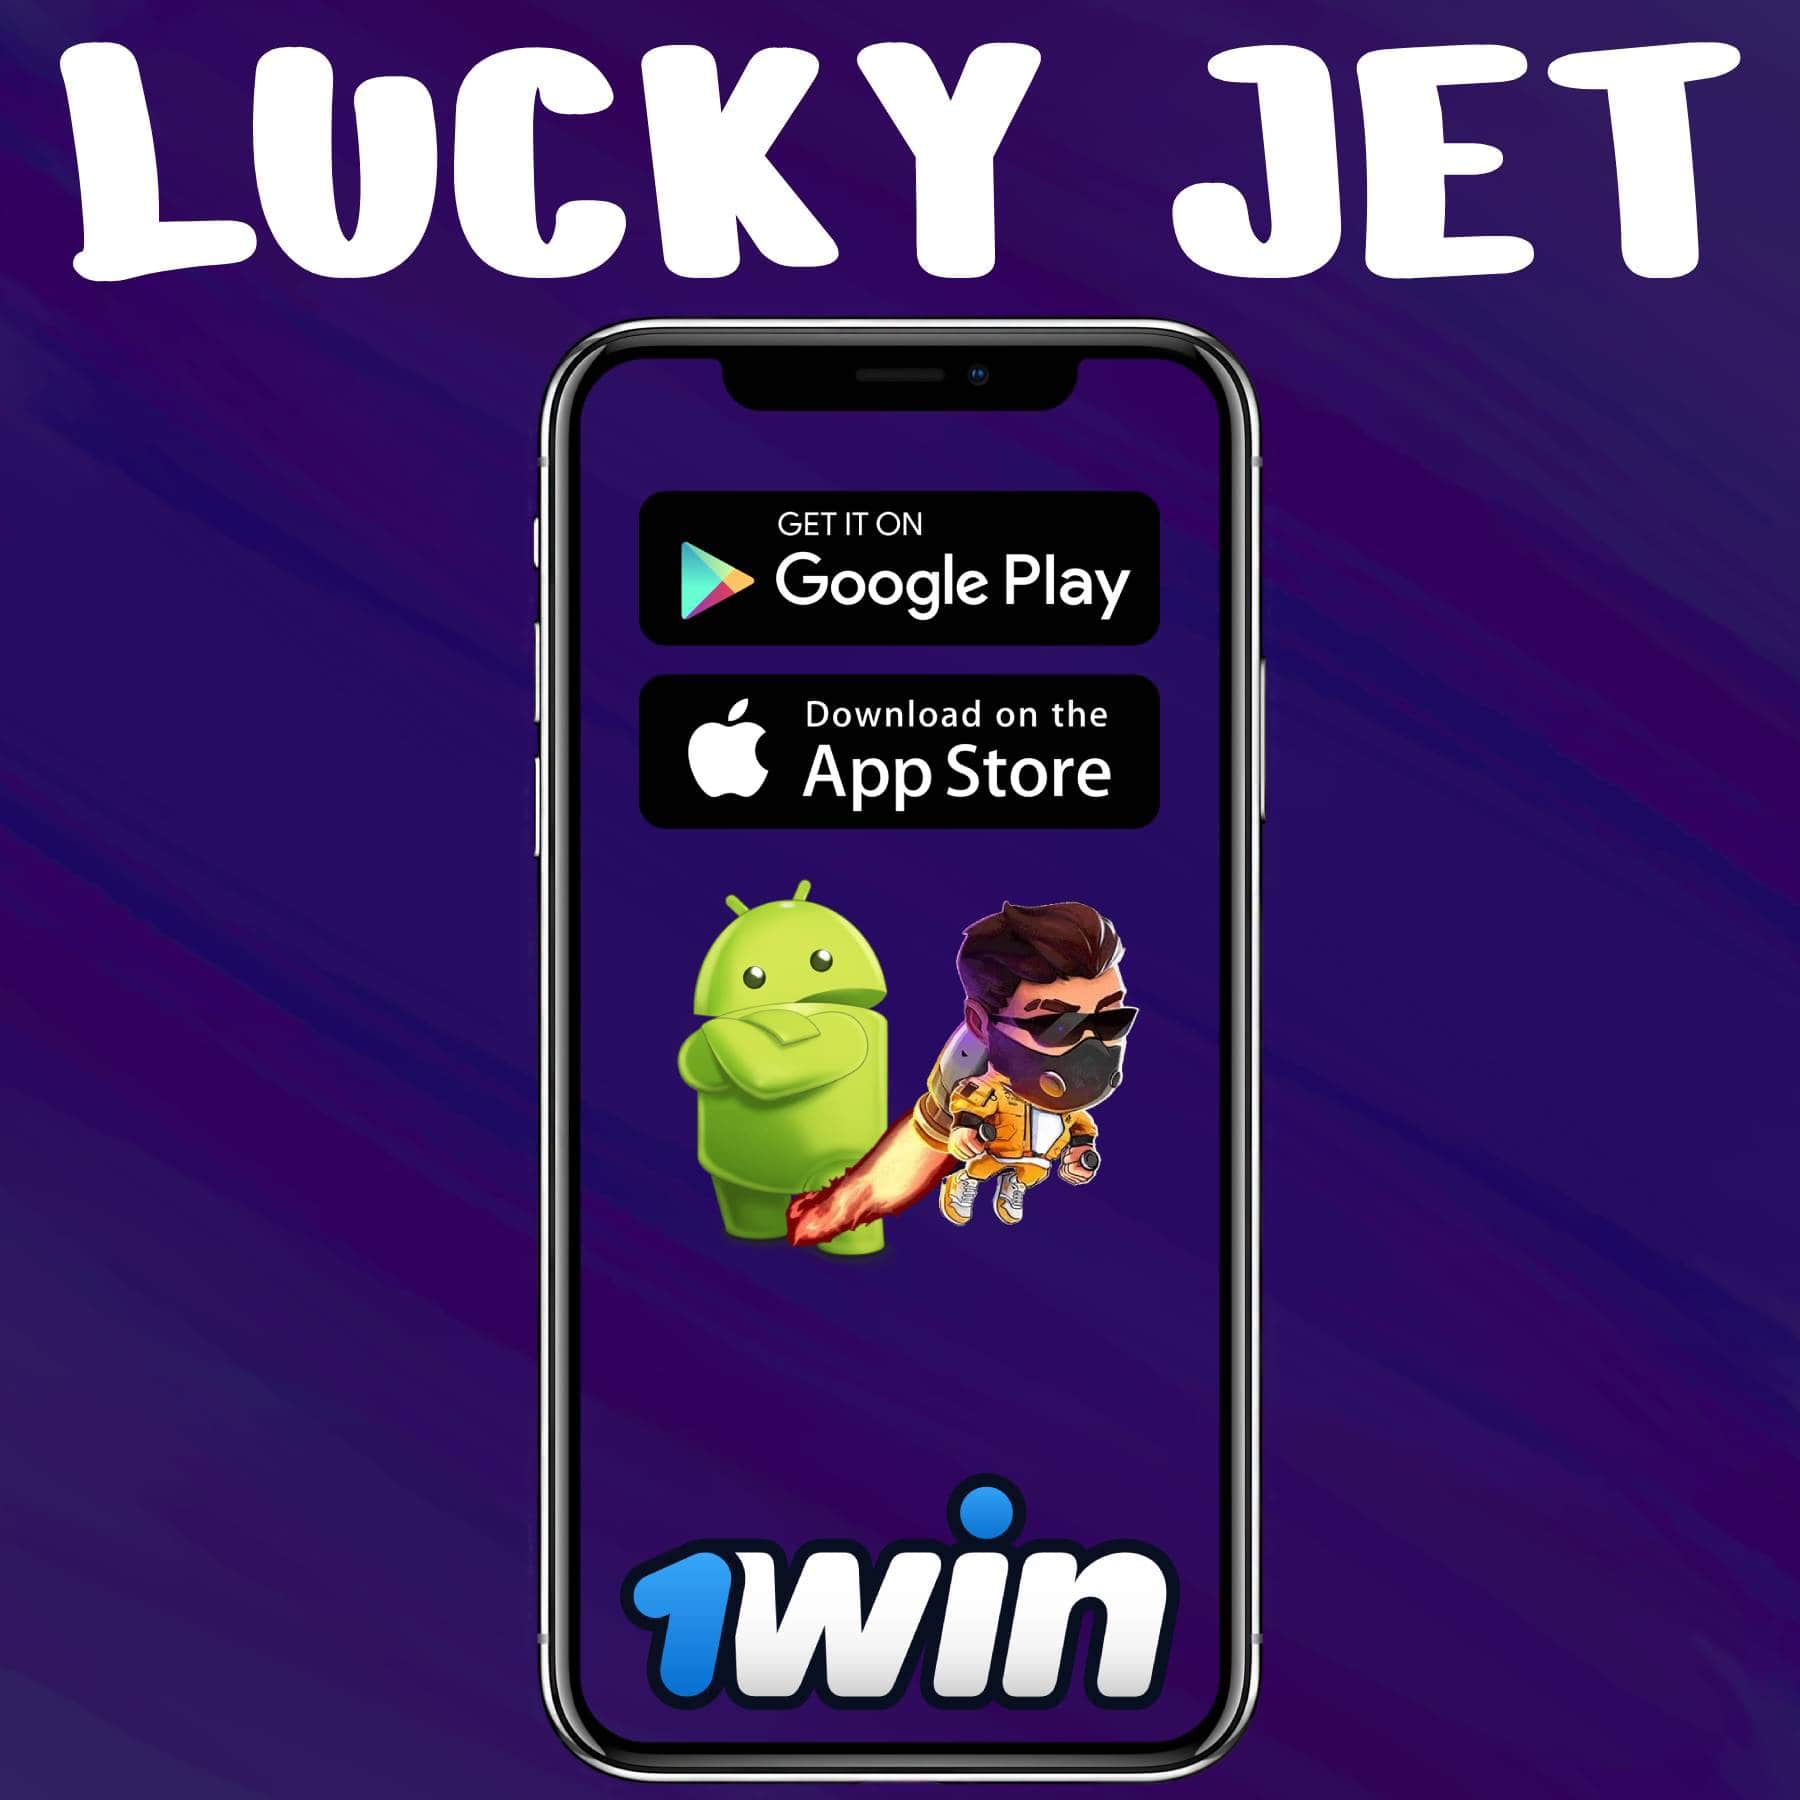 download lucky jet